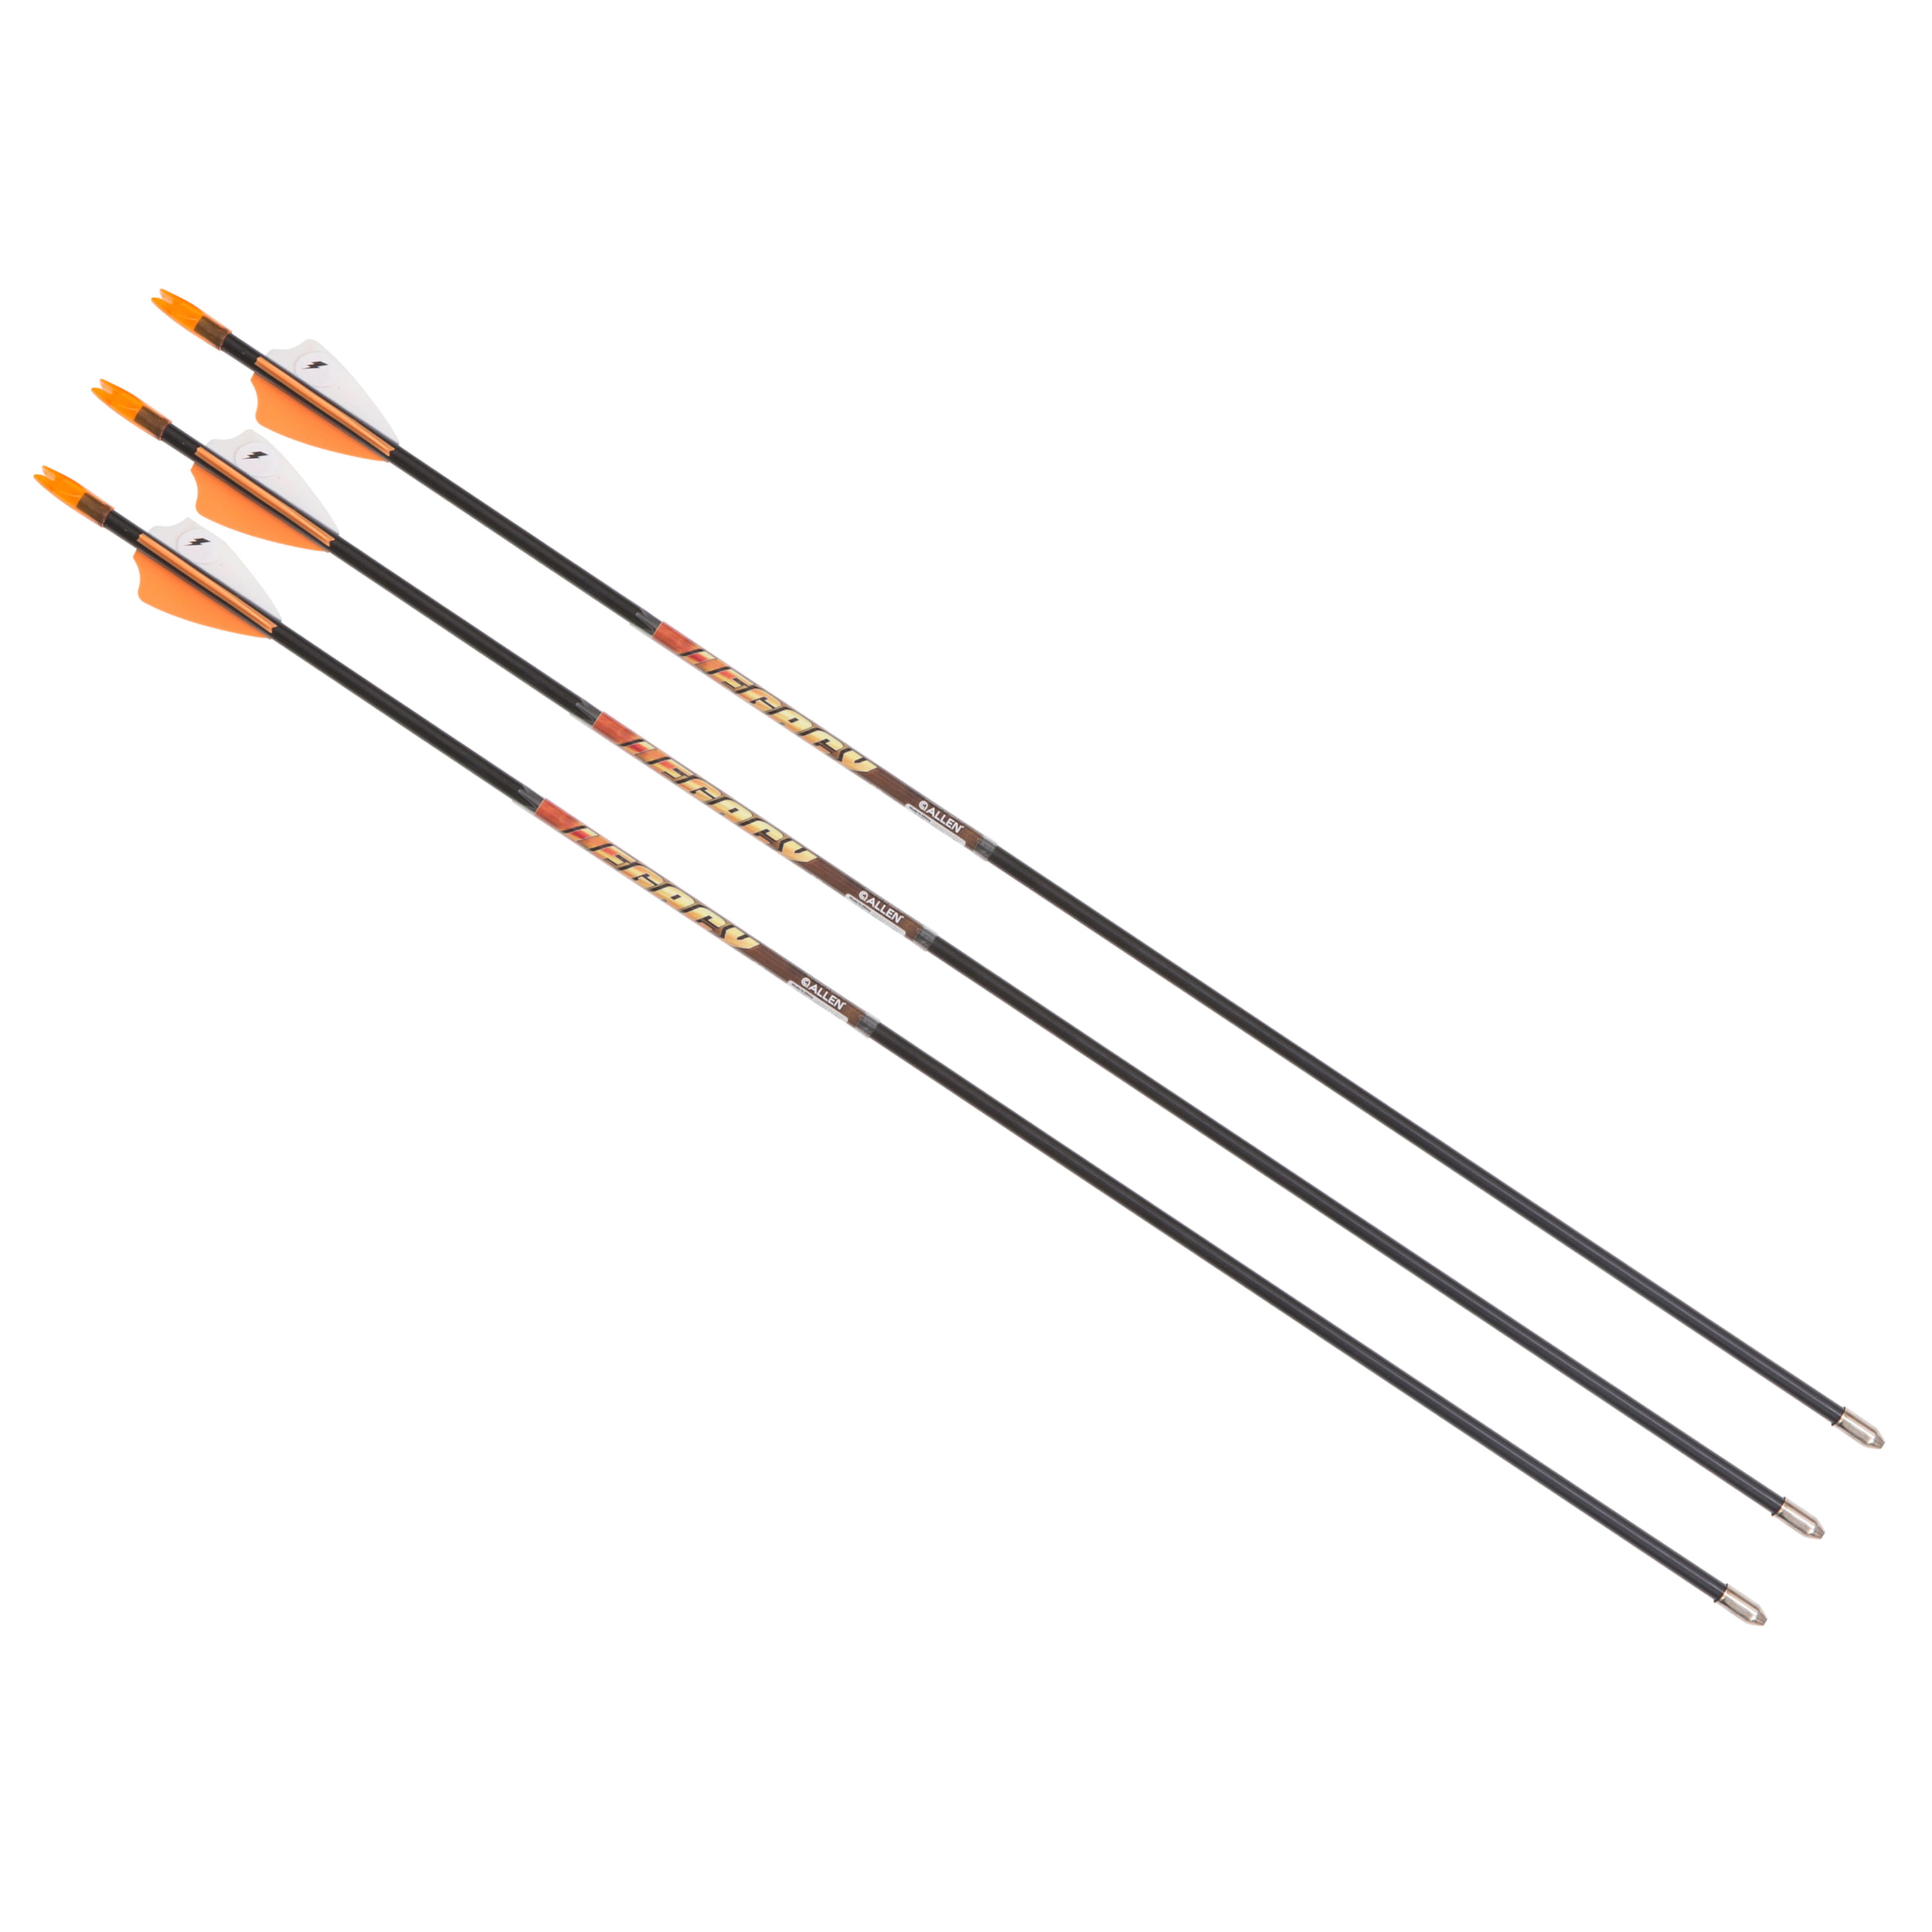 Details about   Archery Carbon Arrows Practices Target Shooting 100Grain Screw-in Tips Crossbow 